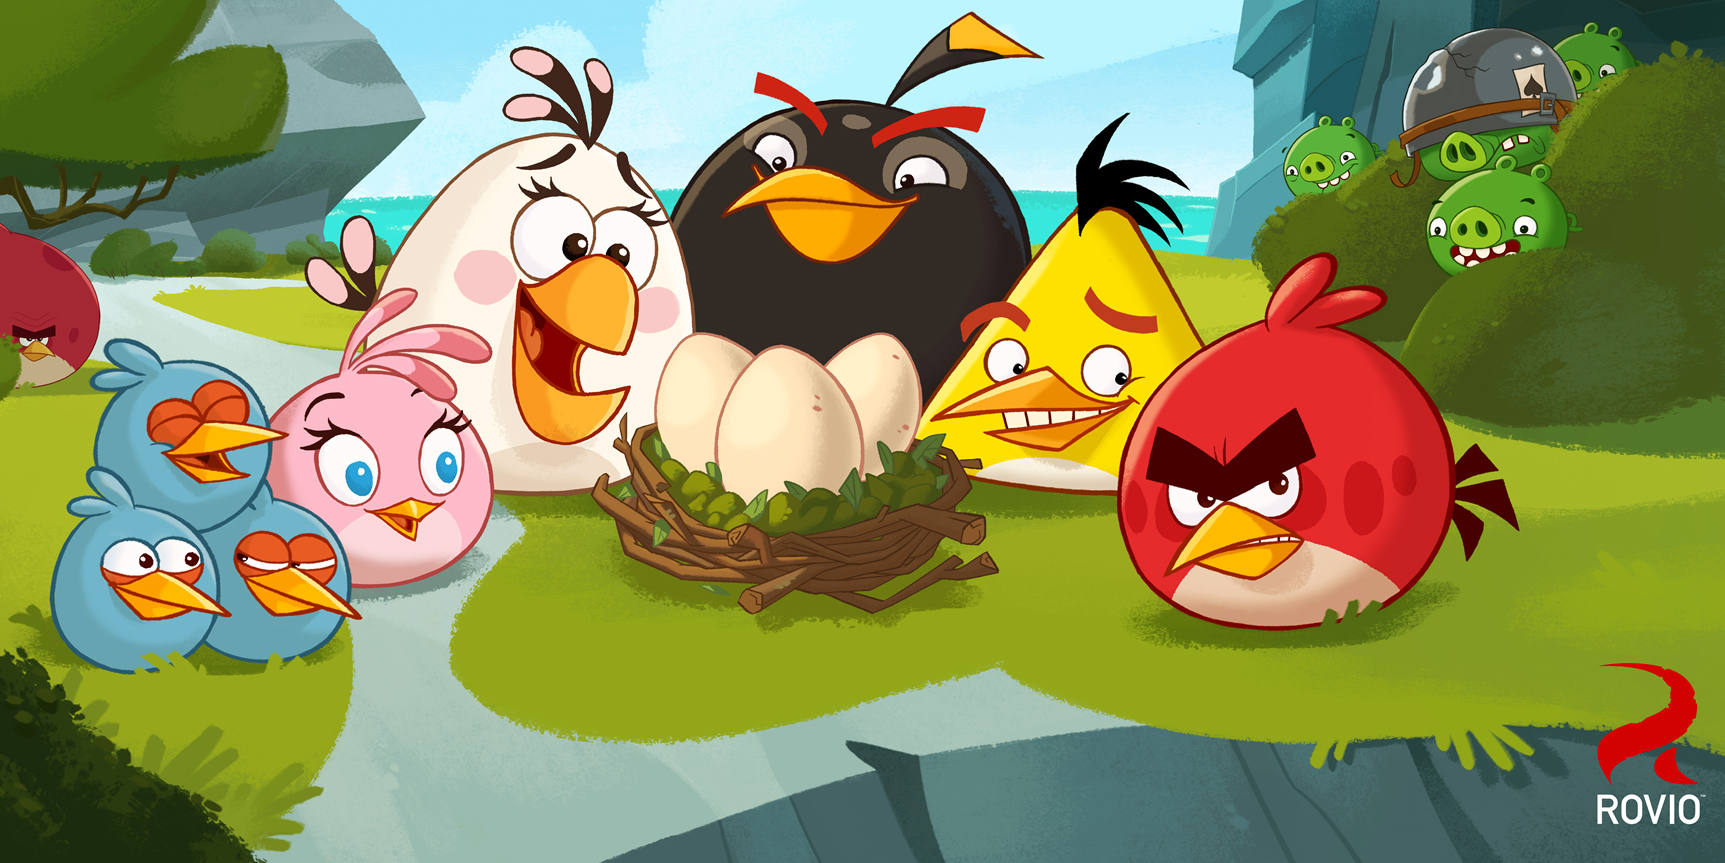 Score a free digital download of complete Angry Birds Toons seasons at  Google Play (Reg. $5)